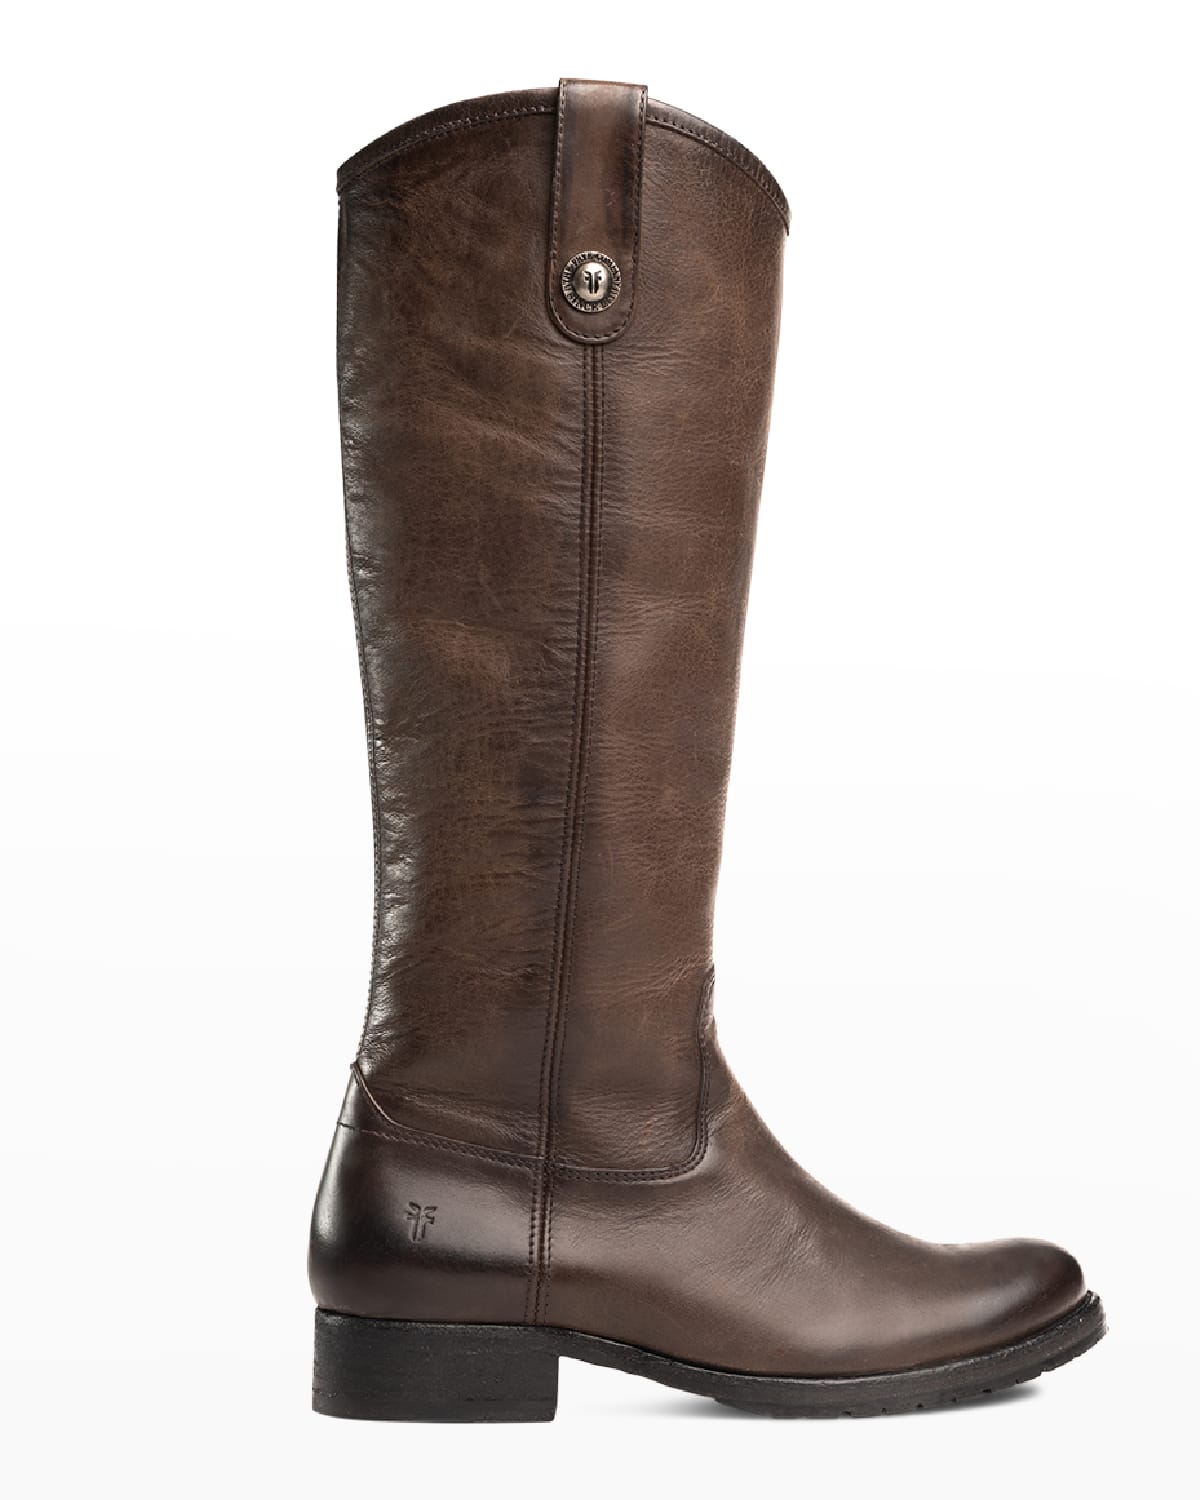 Melissa Button Lug-Sole Tall Riding Boots